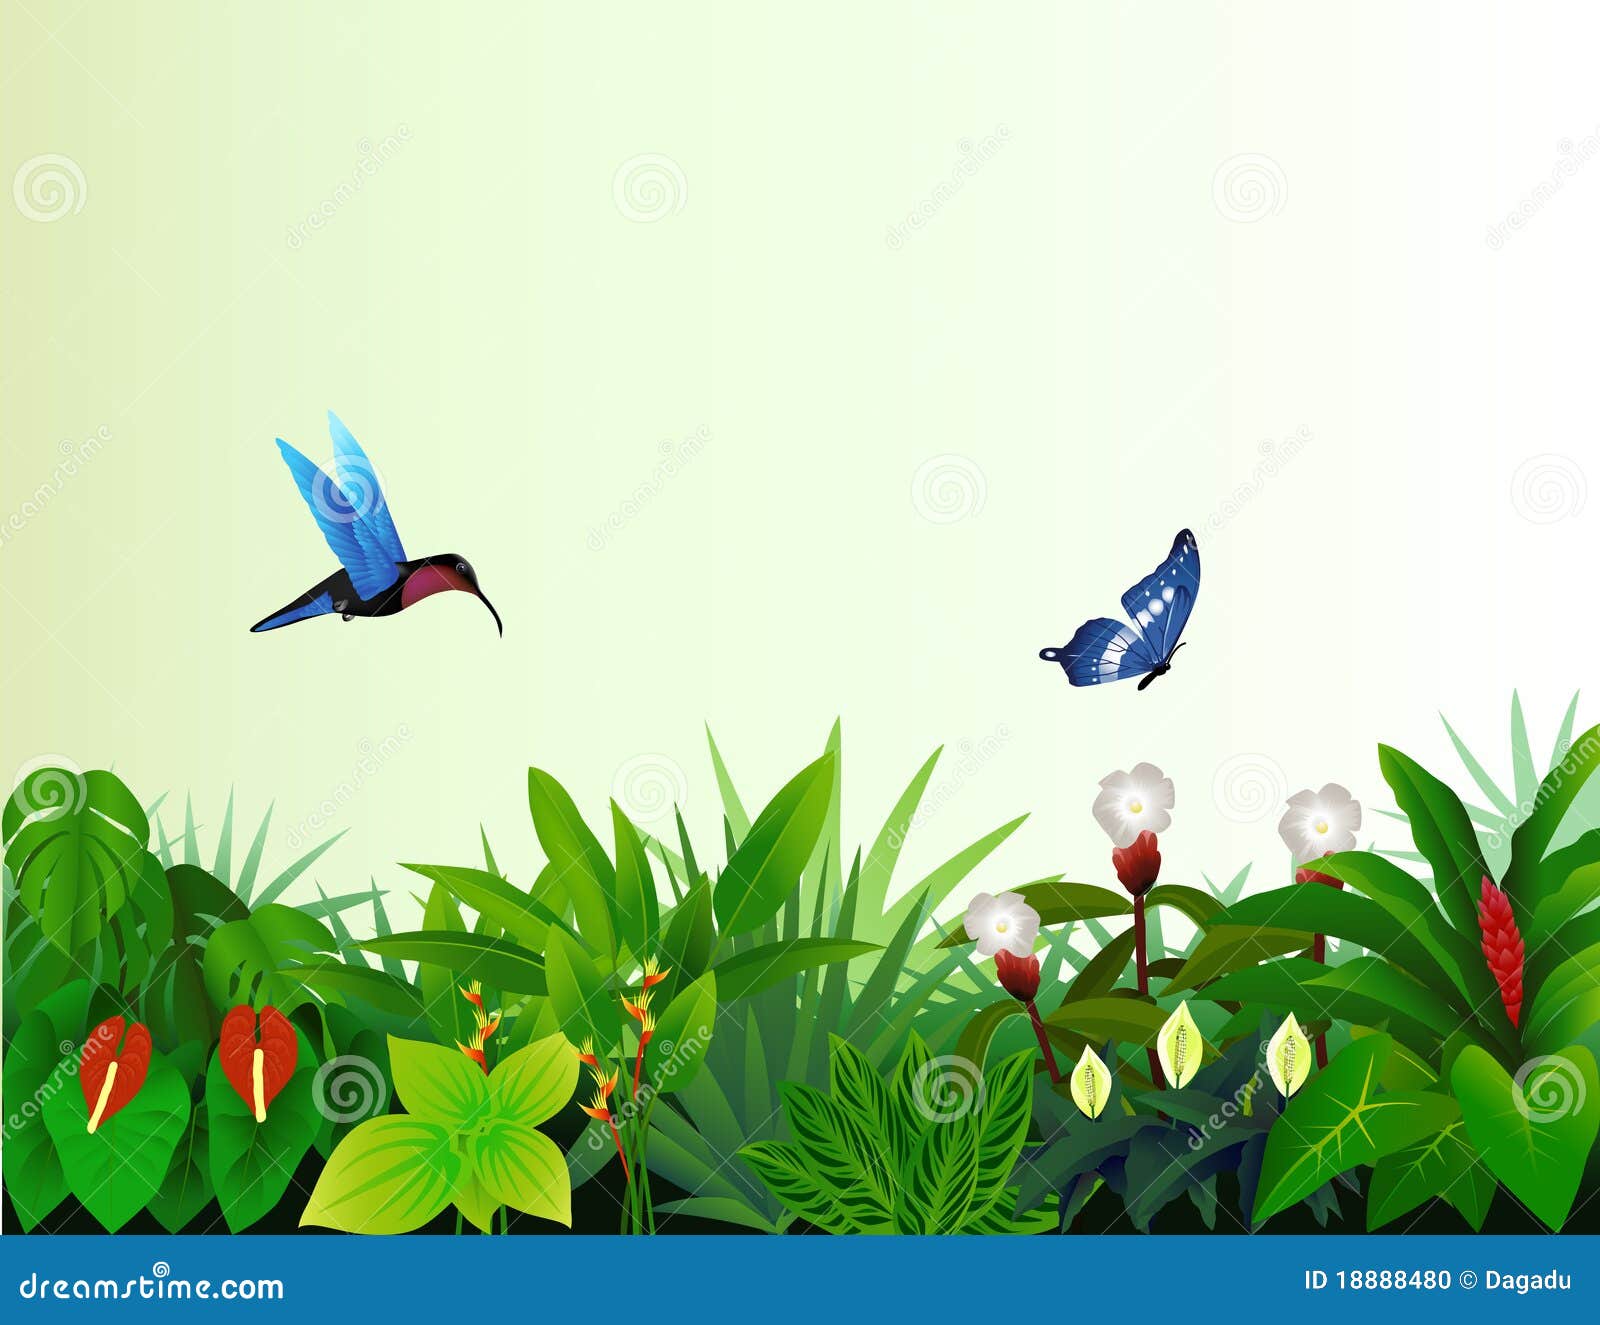 clipart forest background - photo #49